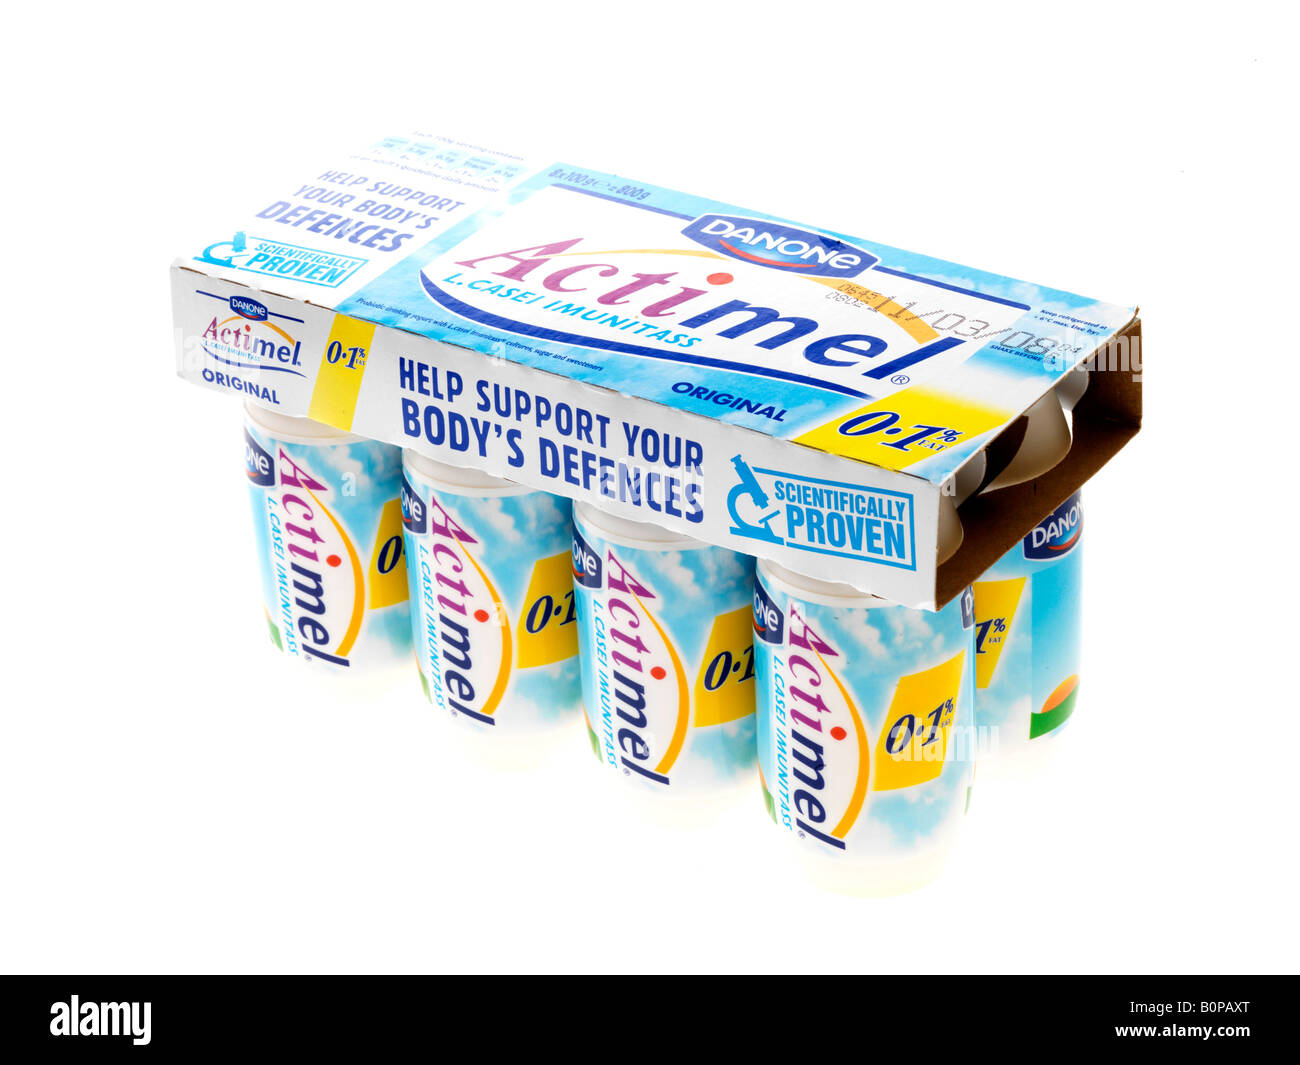 hi-res and Alamy stock - Actimel photography images